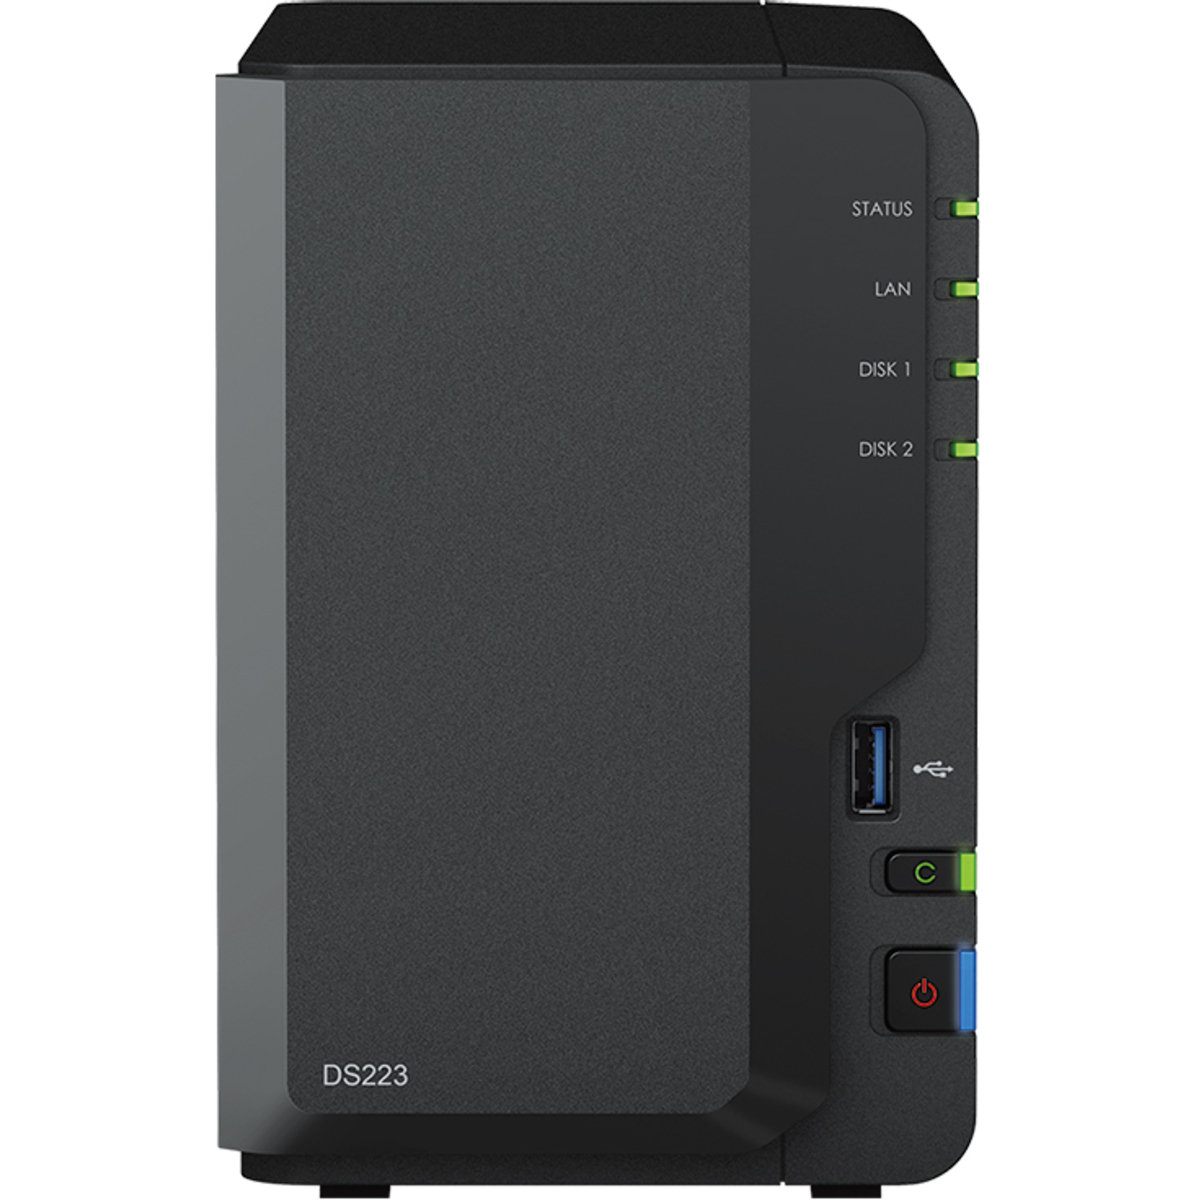 buy Synology DiskStation DS223 8tb Desktop NAS - Network Attached Storage Device 2x4000gb Samsung 870 EVO MZ-77E4T0BAM 2.5 560/530MB/s SATA 6Gb/s SSD CONSUMER Class Drives Installed - Burn-In Tested - nas headquarters buy network attached storage server device das new raid-5 free shipping usa spring sale DiskStation DS223